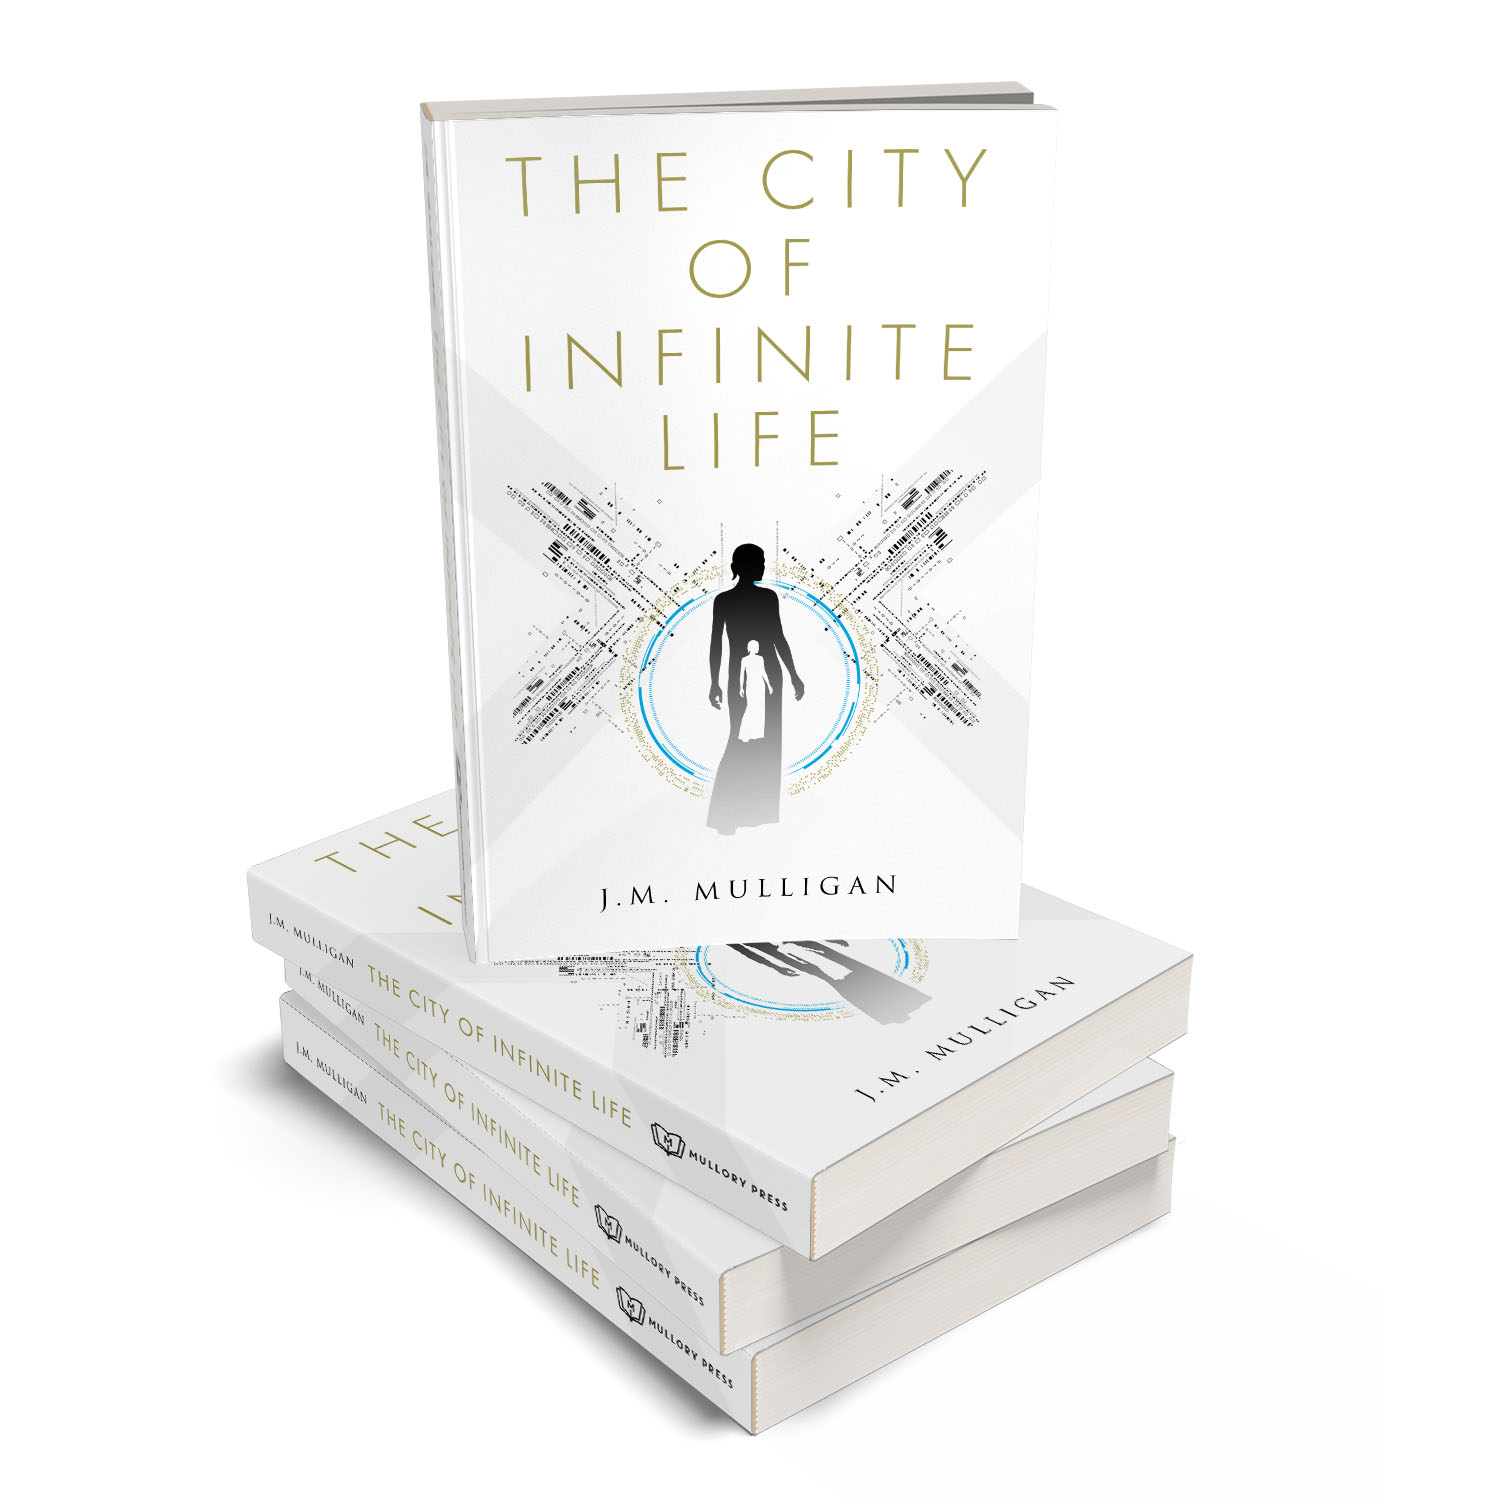 'The City Of Infinite Life' is a deep scifi, alternate reality thriller. The author is J.M. Mulligan. The book cover and interior were designed by Mark Thomas of coverness.com. To find out more about my book design services, please visit www.coverness.com